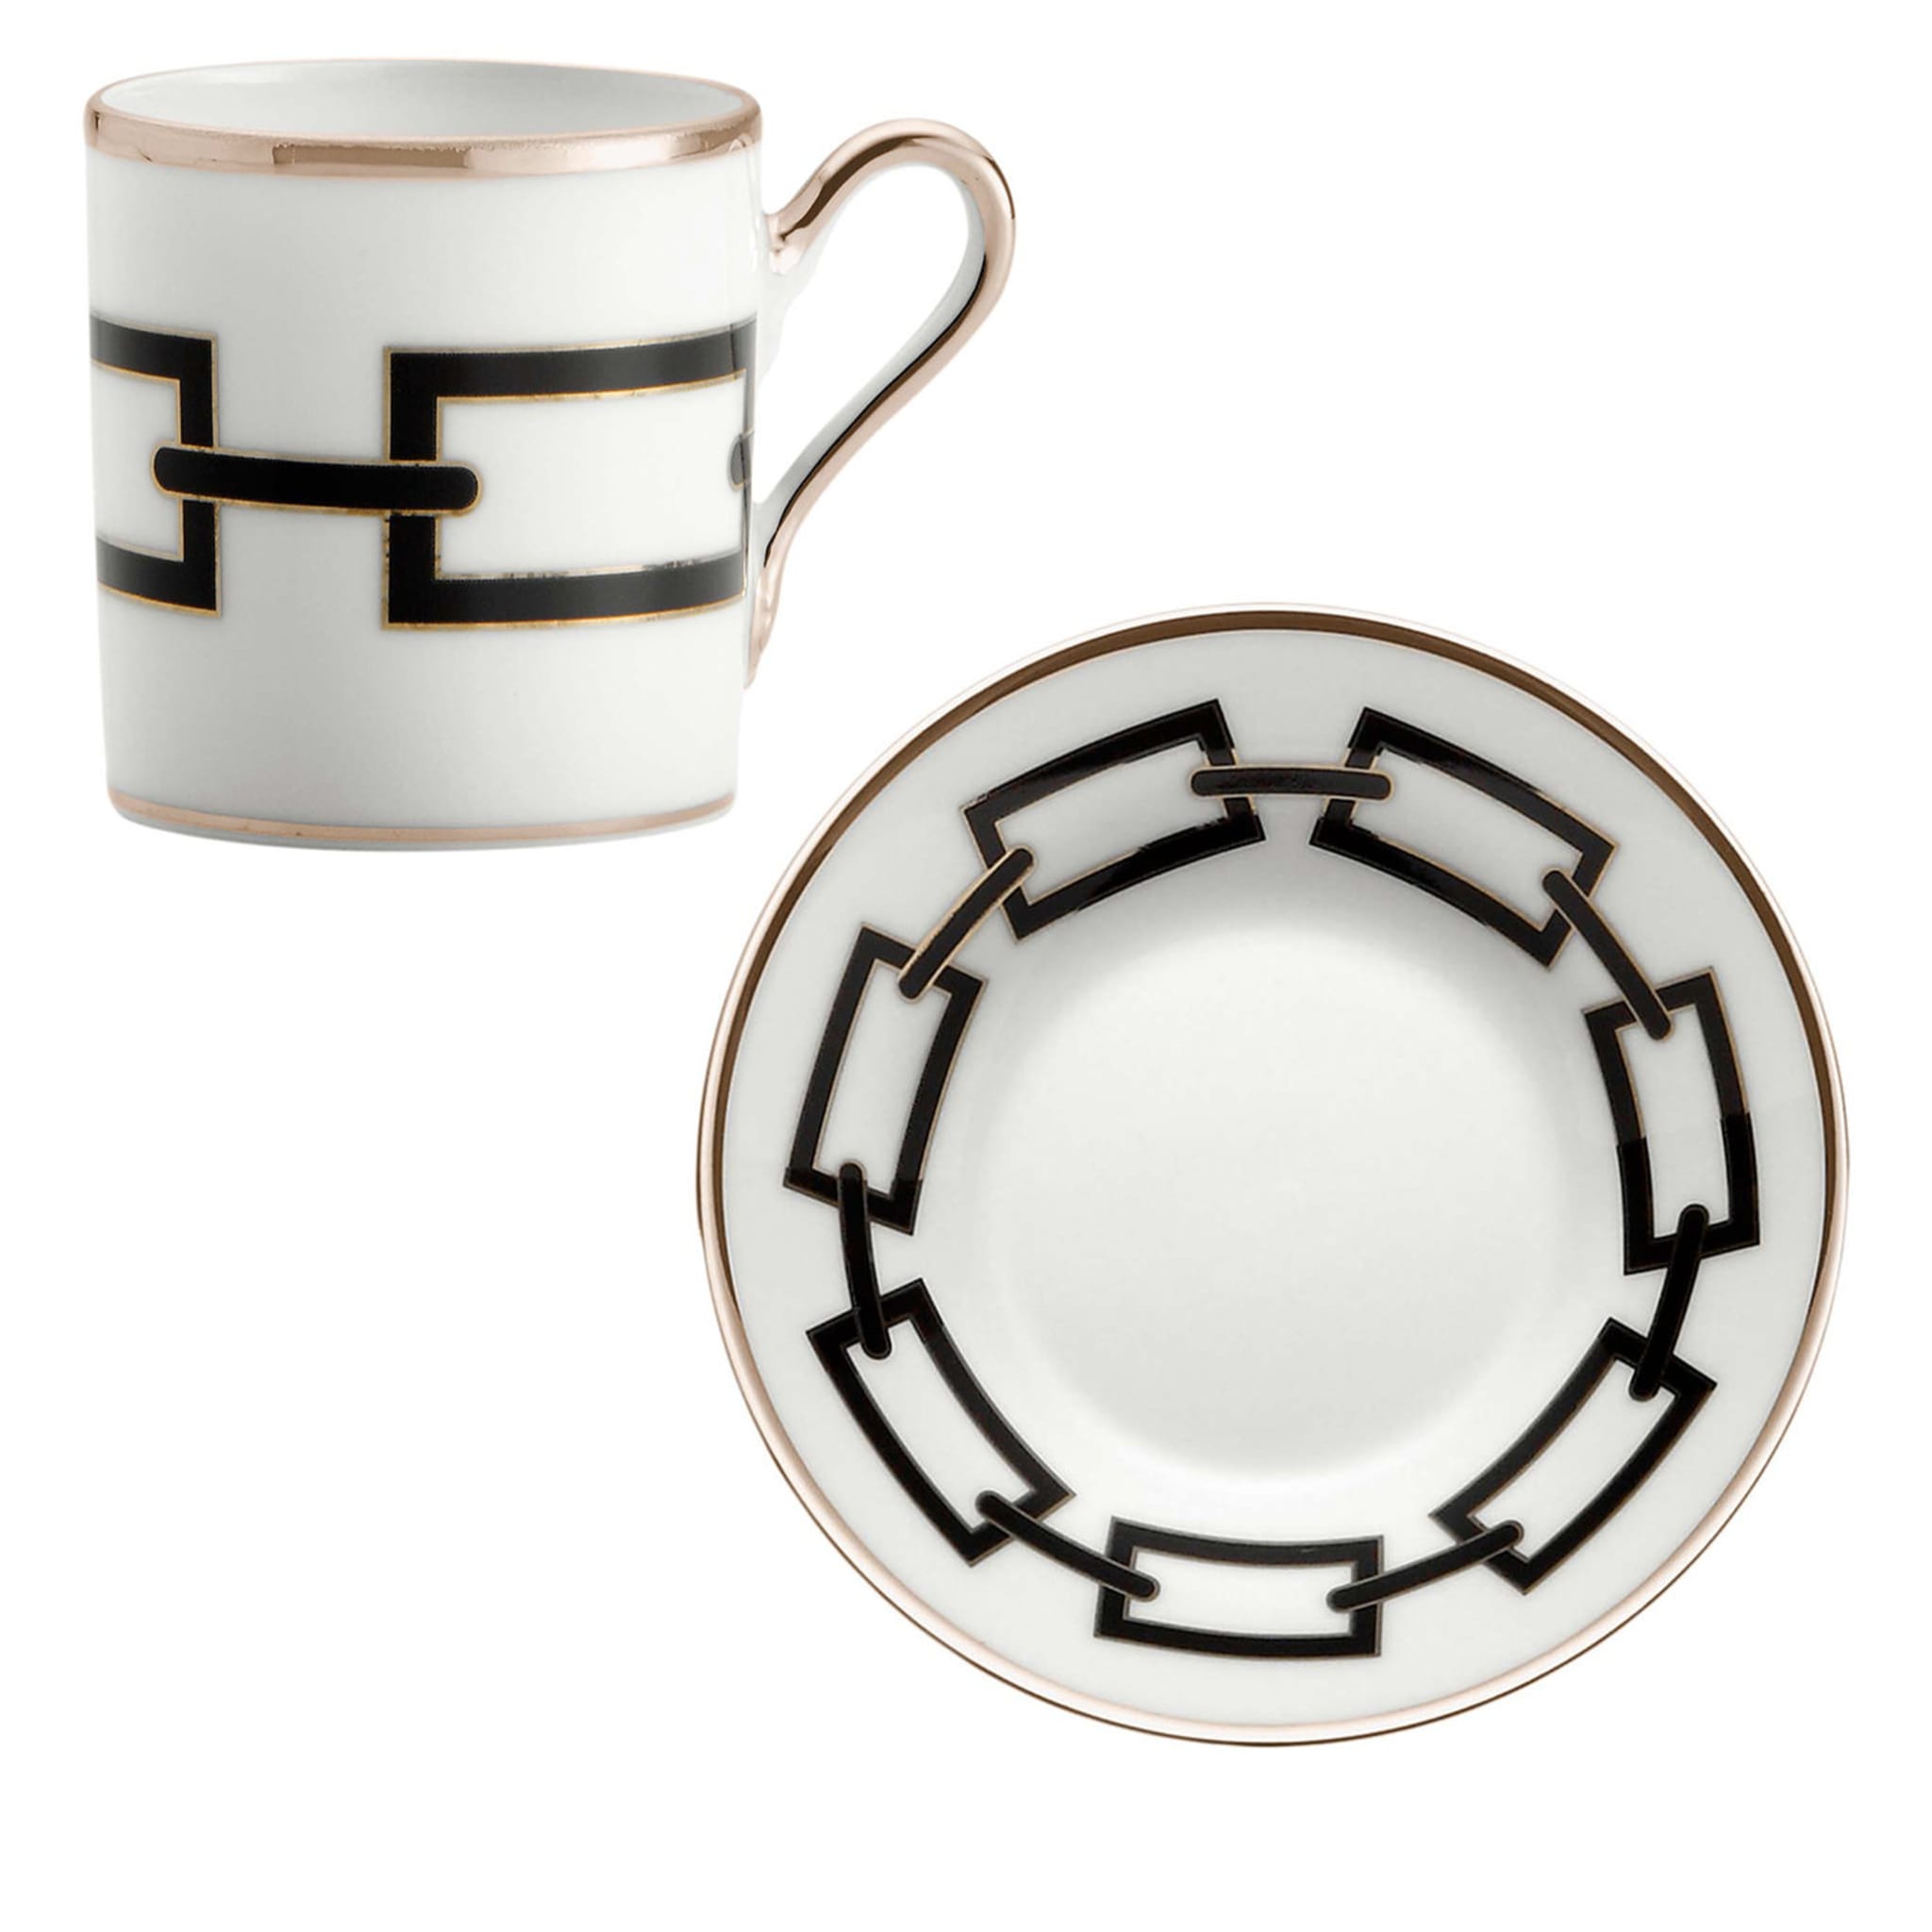 Catene Nero Set of 2 Espresso Cups and Saucers by Gio Ponti  - Main view